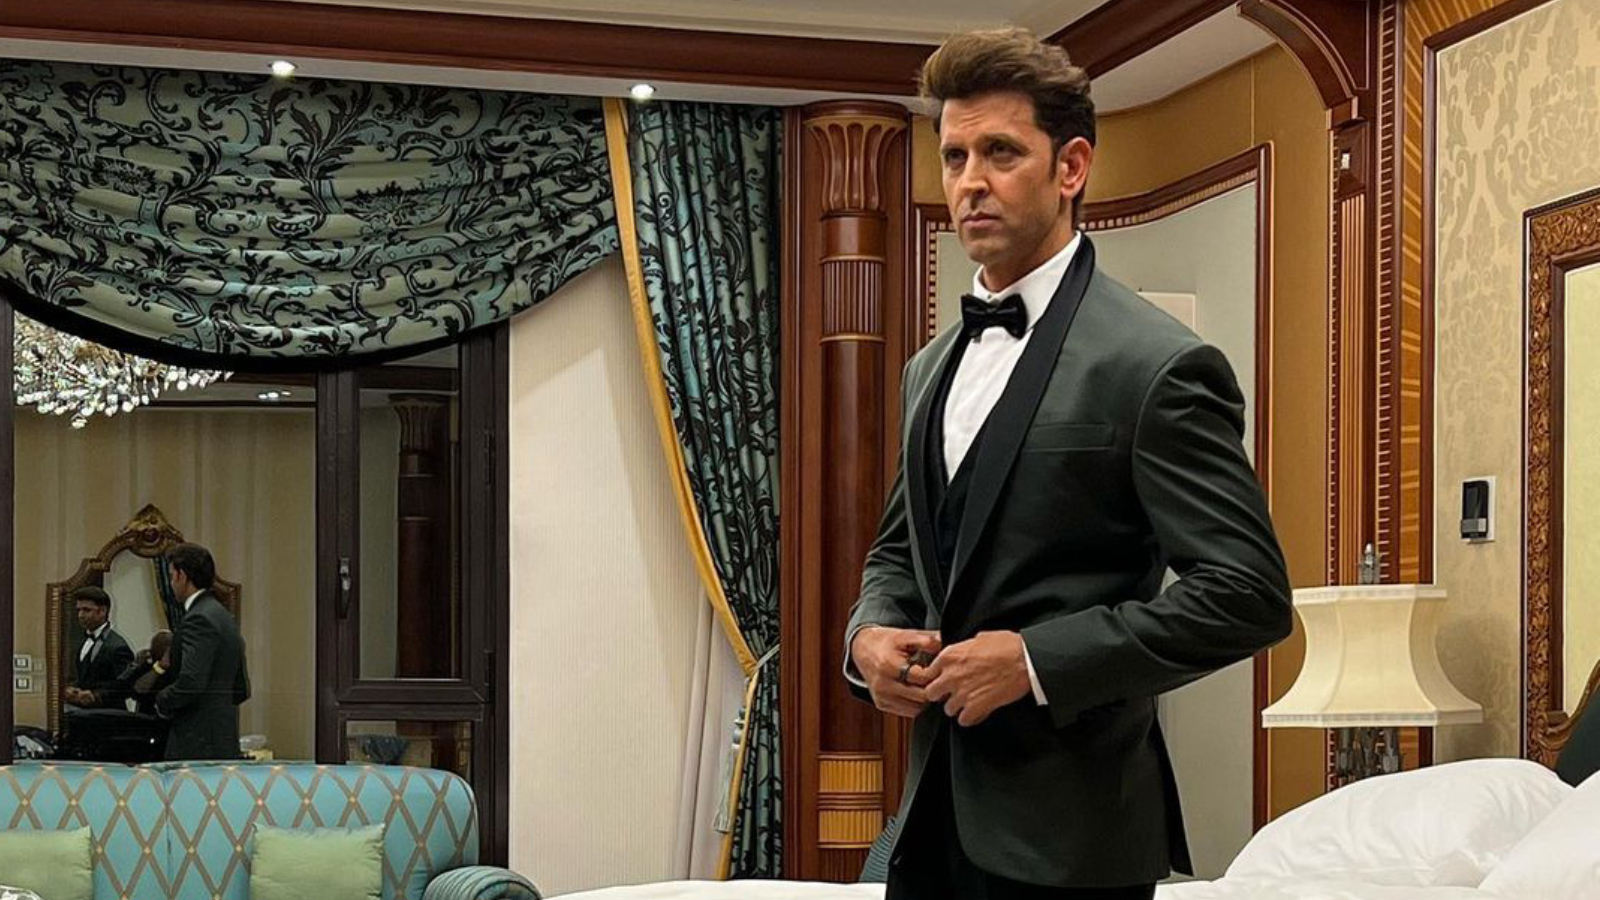 TROY COSTA - Hrithik Roshan in an Ice Grey three piece classic Suit  ensembled with Ivory Suit Shirt, Metallic grey slim Tie & Pocket square. |  Facebook